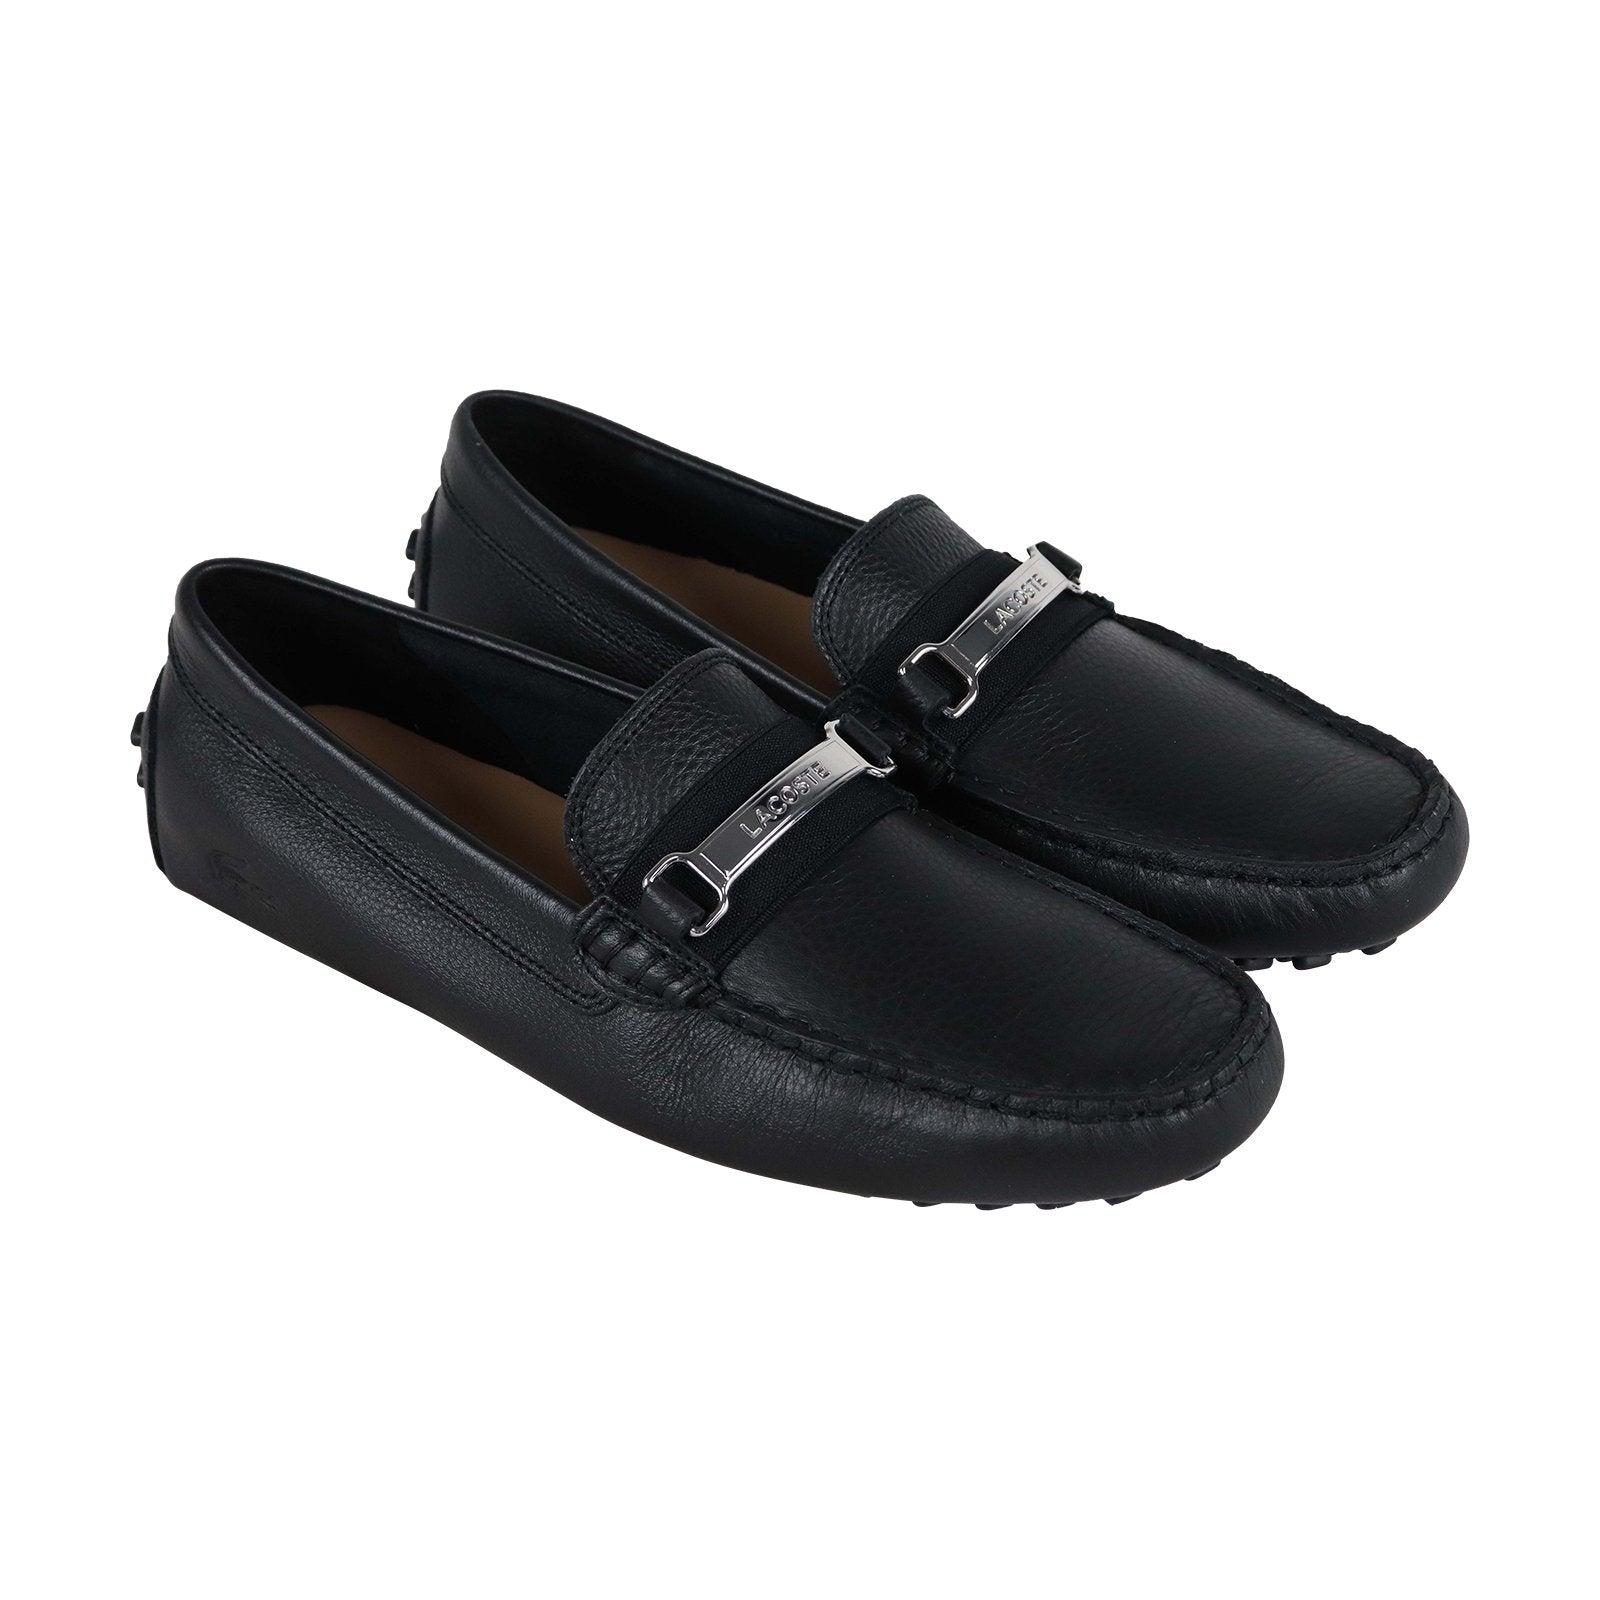 Lacoste Ansted 318 1 U Mens Black Leather Slip On Moccasin Loafers Sho ...